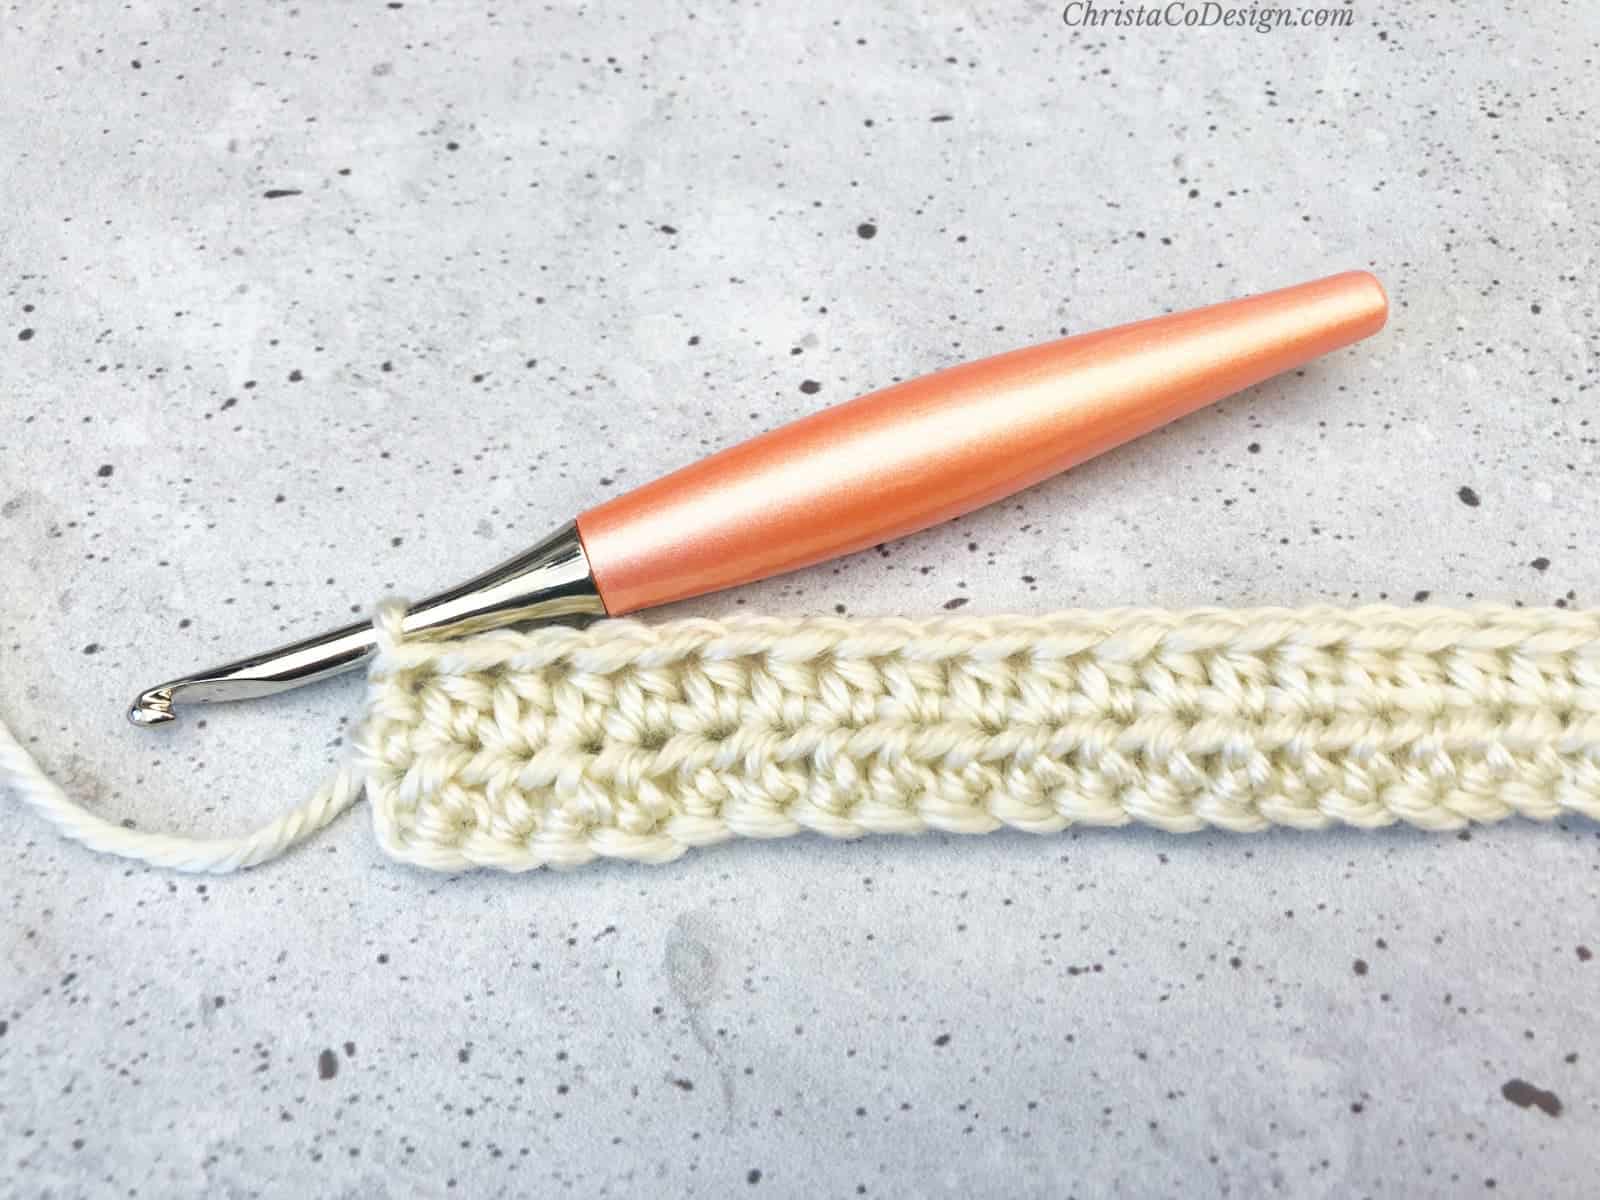 What Does RS and WS Mean In Crochet?